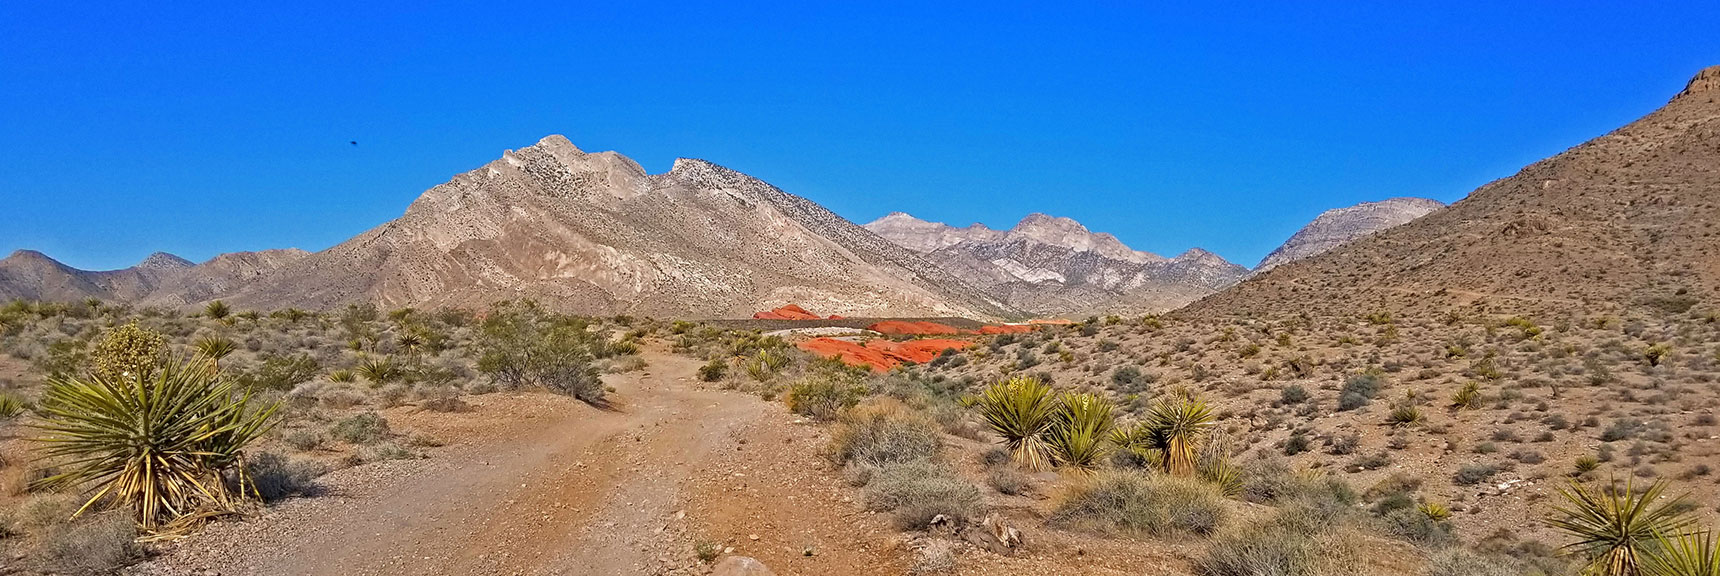 4WD Road System Leads to Little Red Rock at Base of Damsel Peak (center) | Little Red Rock Las Vegas, Nevada, Near La Madre Mountains Wilderness